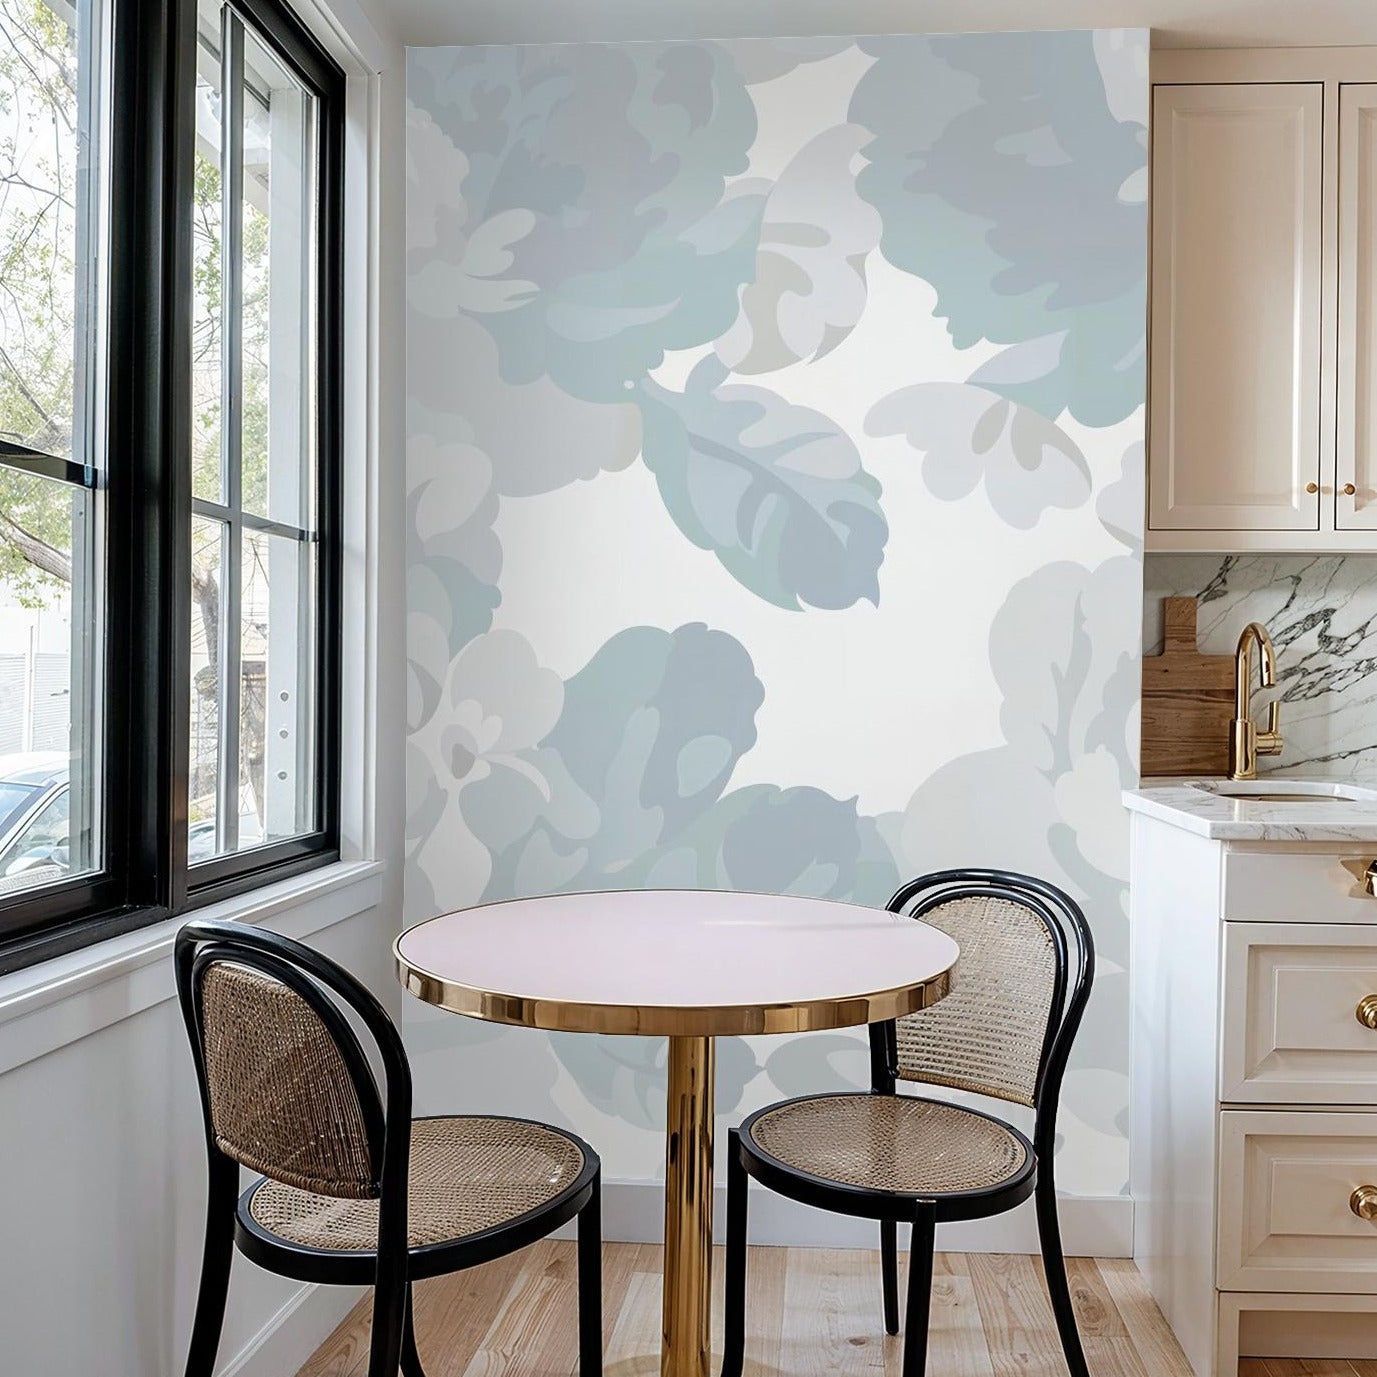 "Terra Bloom Wallpaper from Wall Blush in a stylish kitchen, with focus on floral wall design."